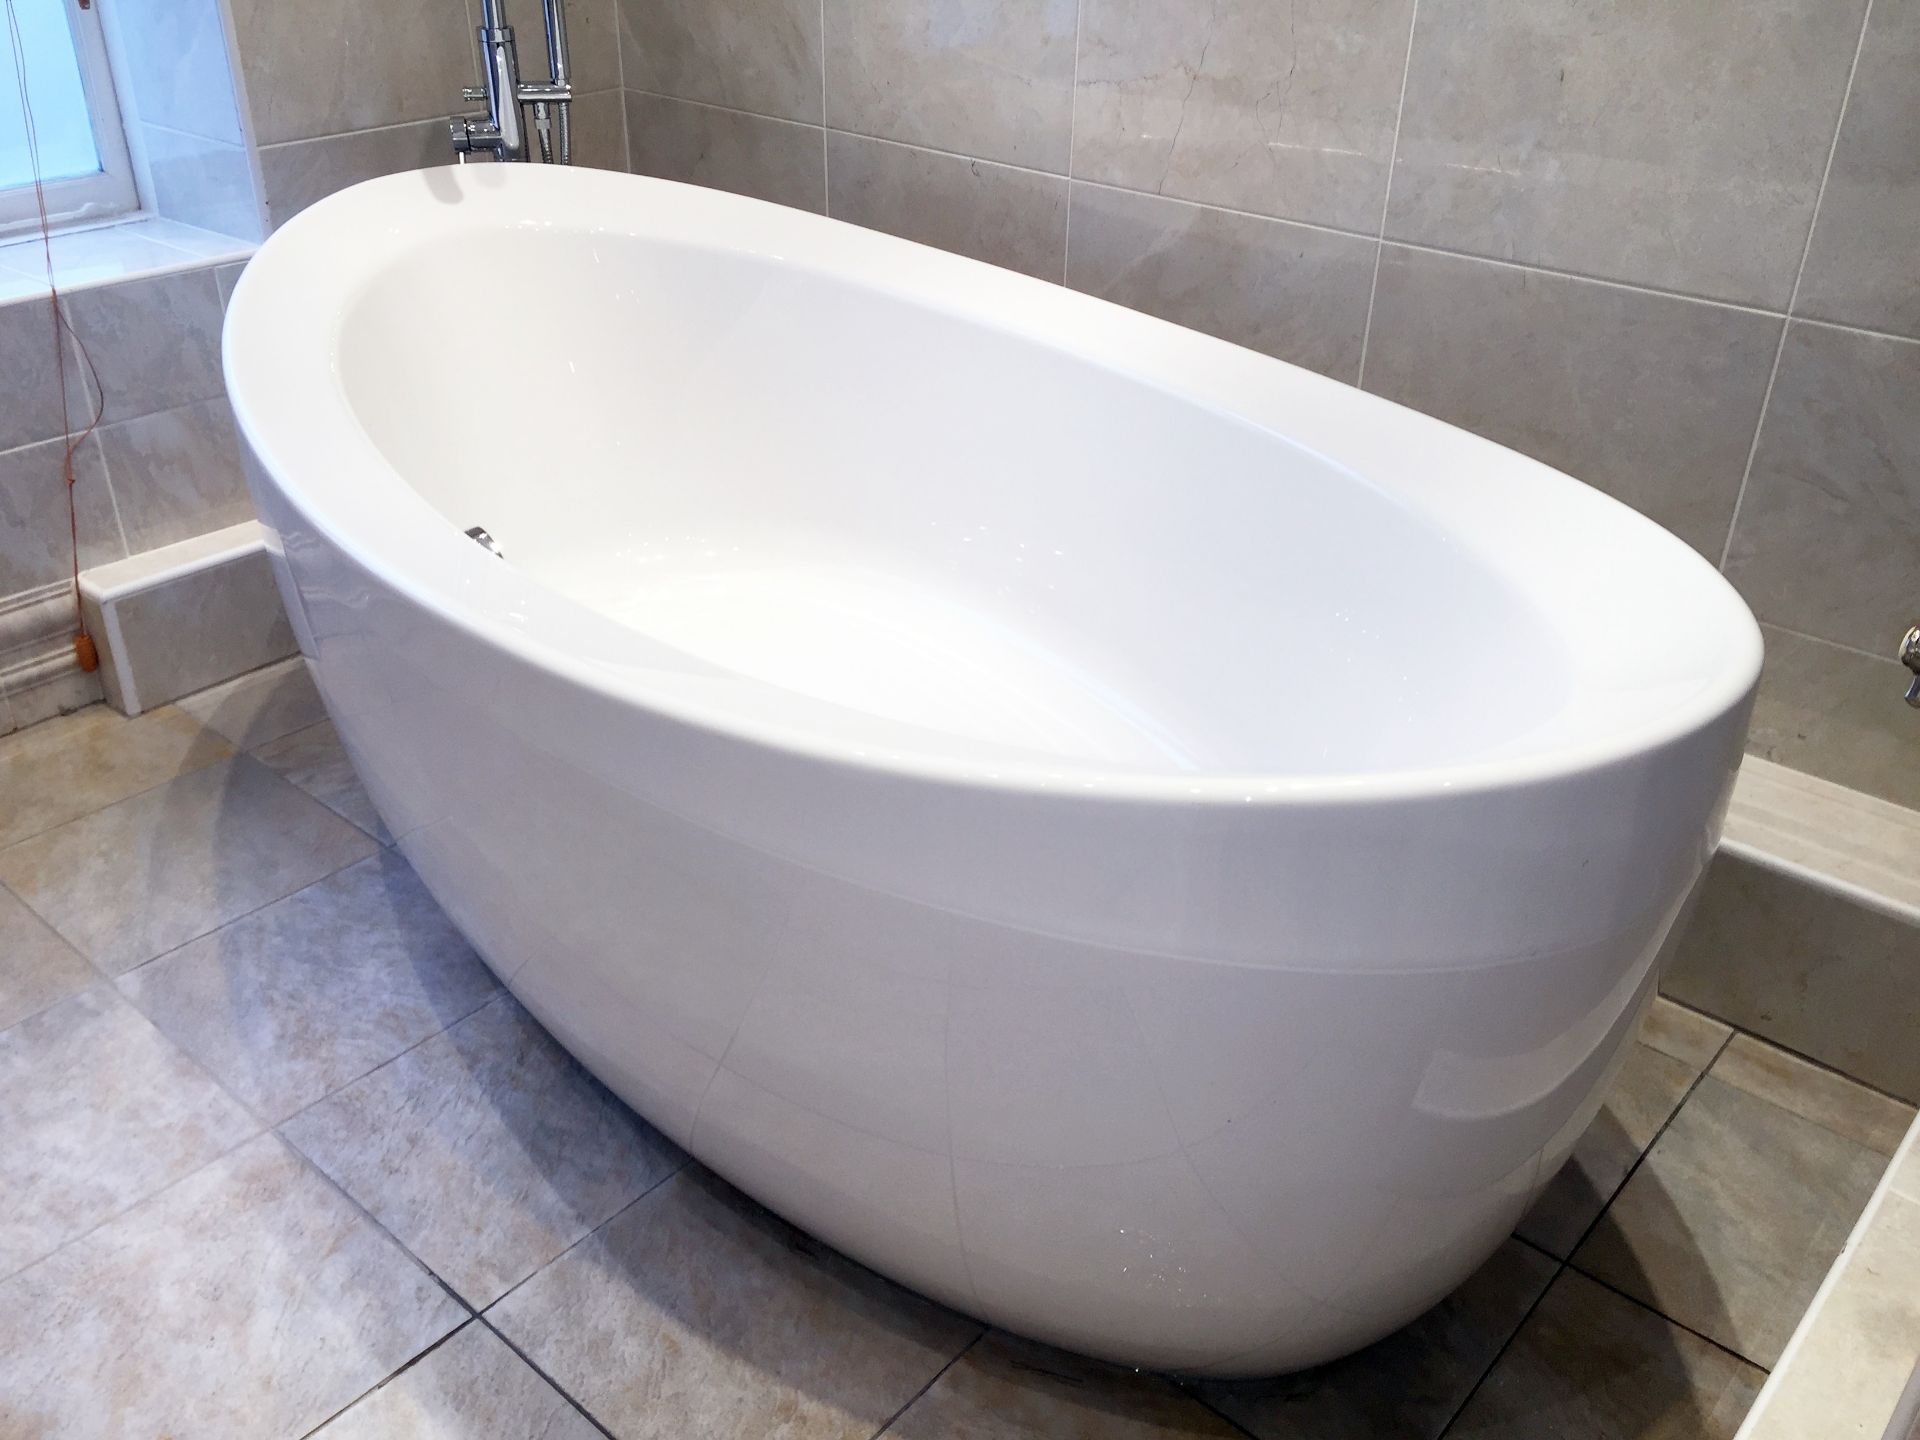 1 x Bath With A Floor Mounted Bath Filler Tap - Preowned In Good Condition - More Information To - Image 4 of 8